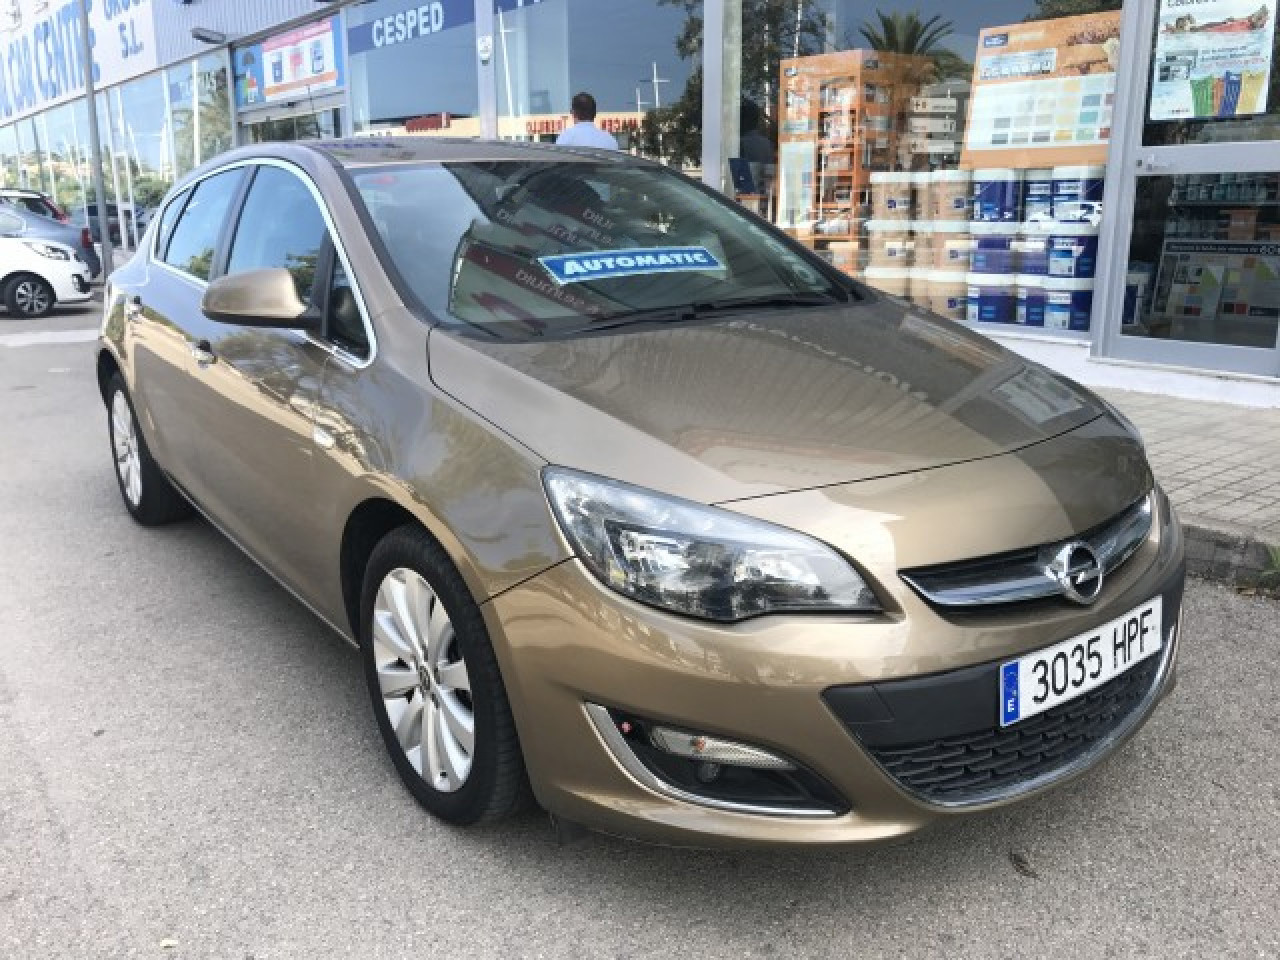 Opel Astra 1.4 Turbo 140BHP Excellence Automatic Hatchback